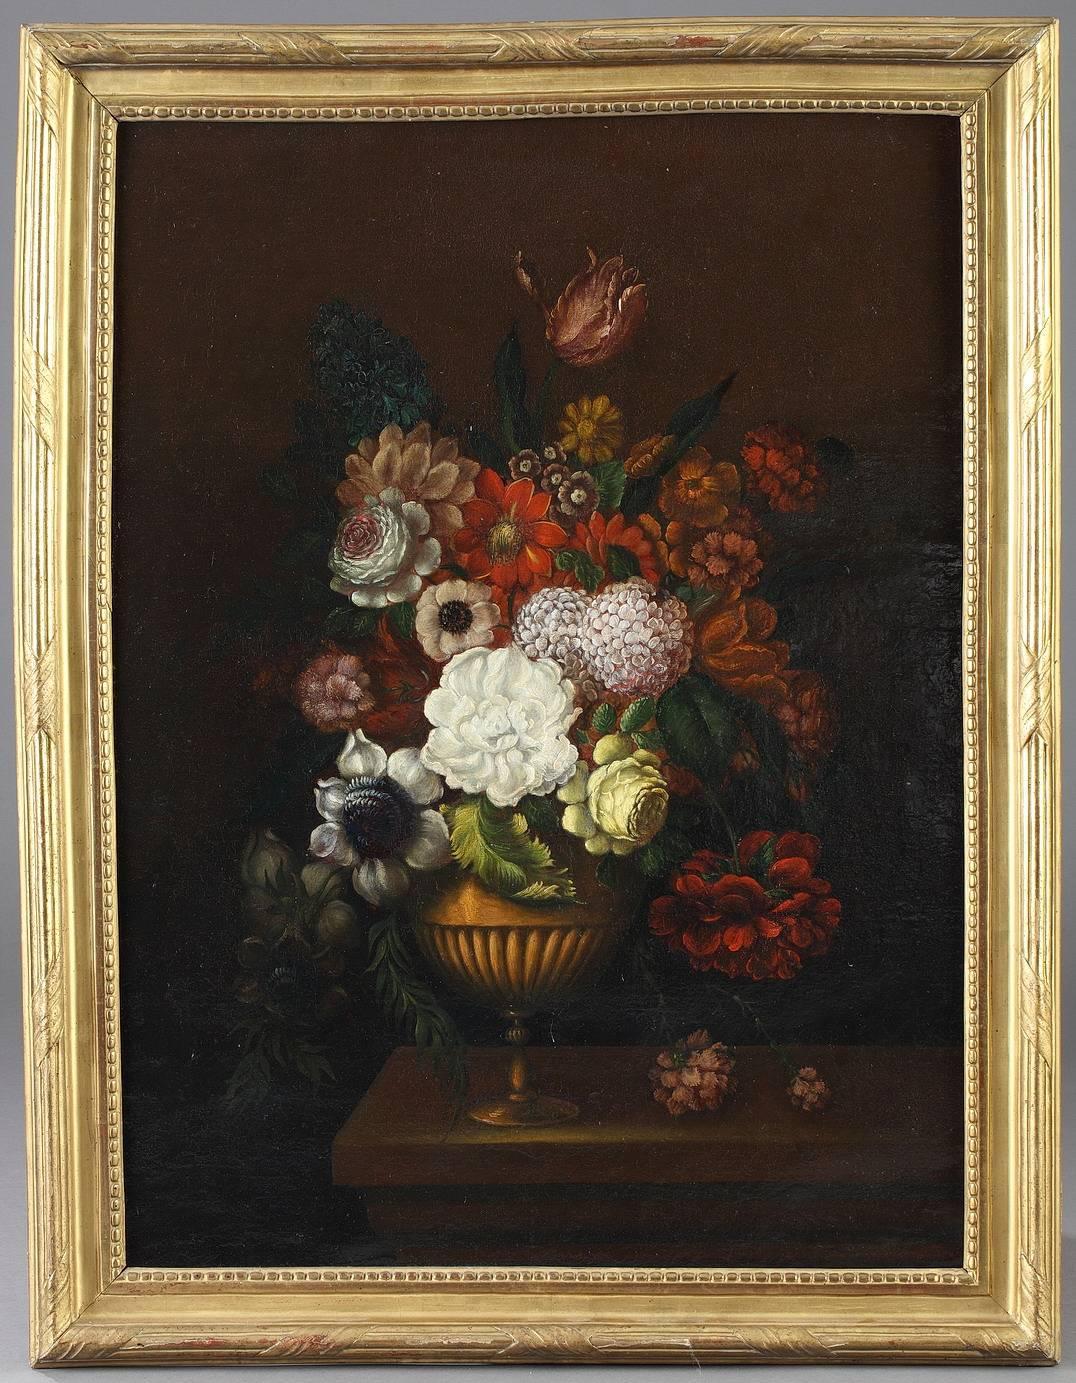 Two oil on canvas paintings in the Dutch School style. Each painting features an overflowing bouquet of flowers in a gadrooned vase. The original giltwood frames are decorated with beading and grooves interspaced with wide, diagonal bands, 19th